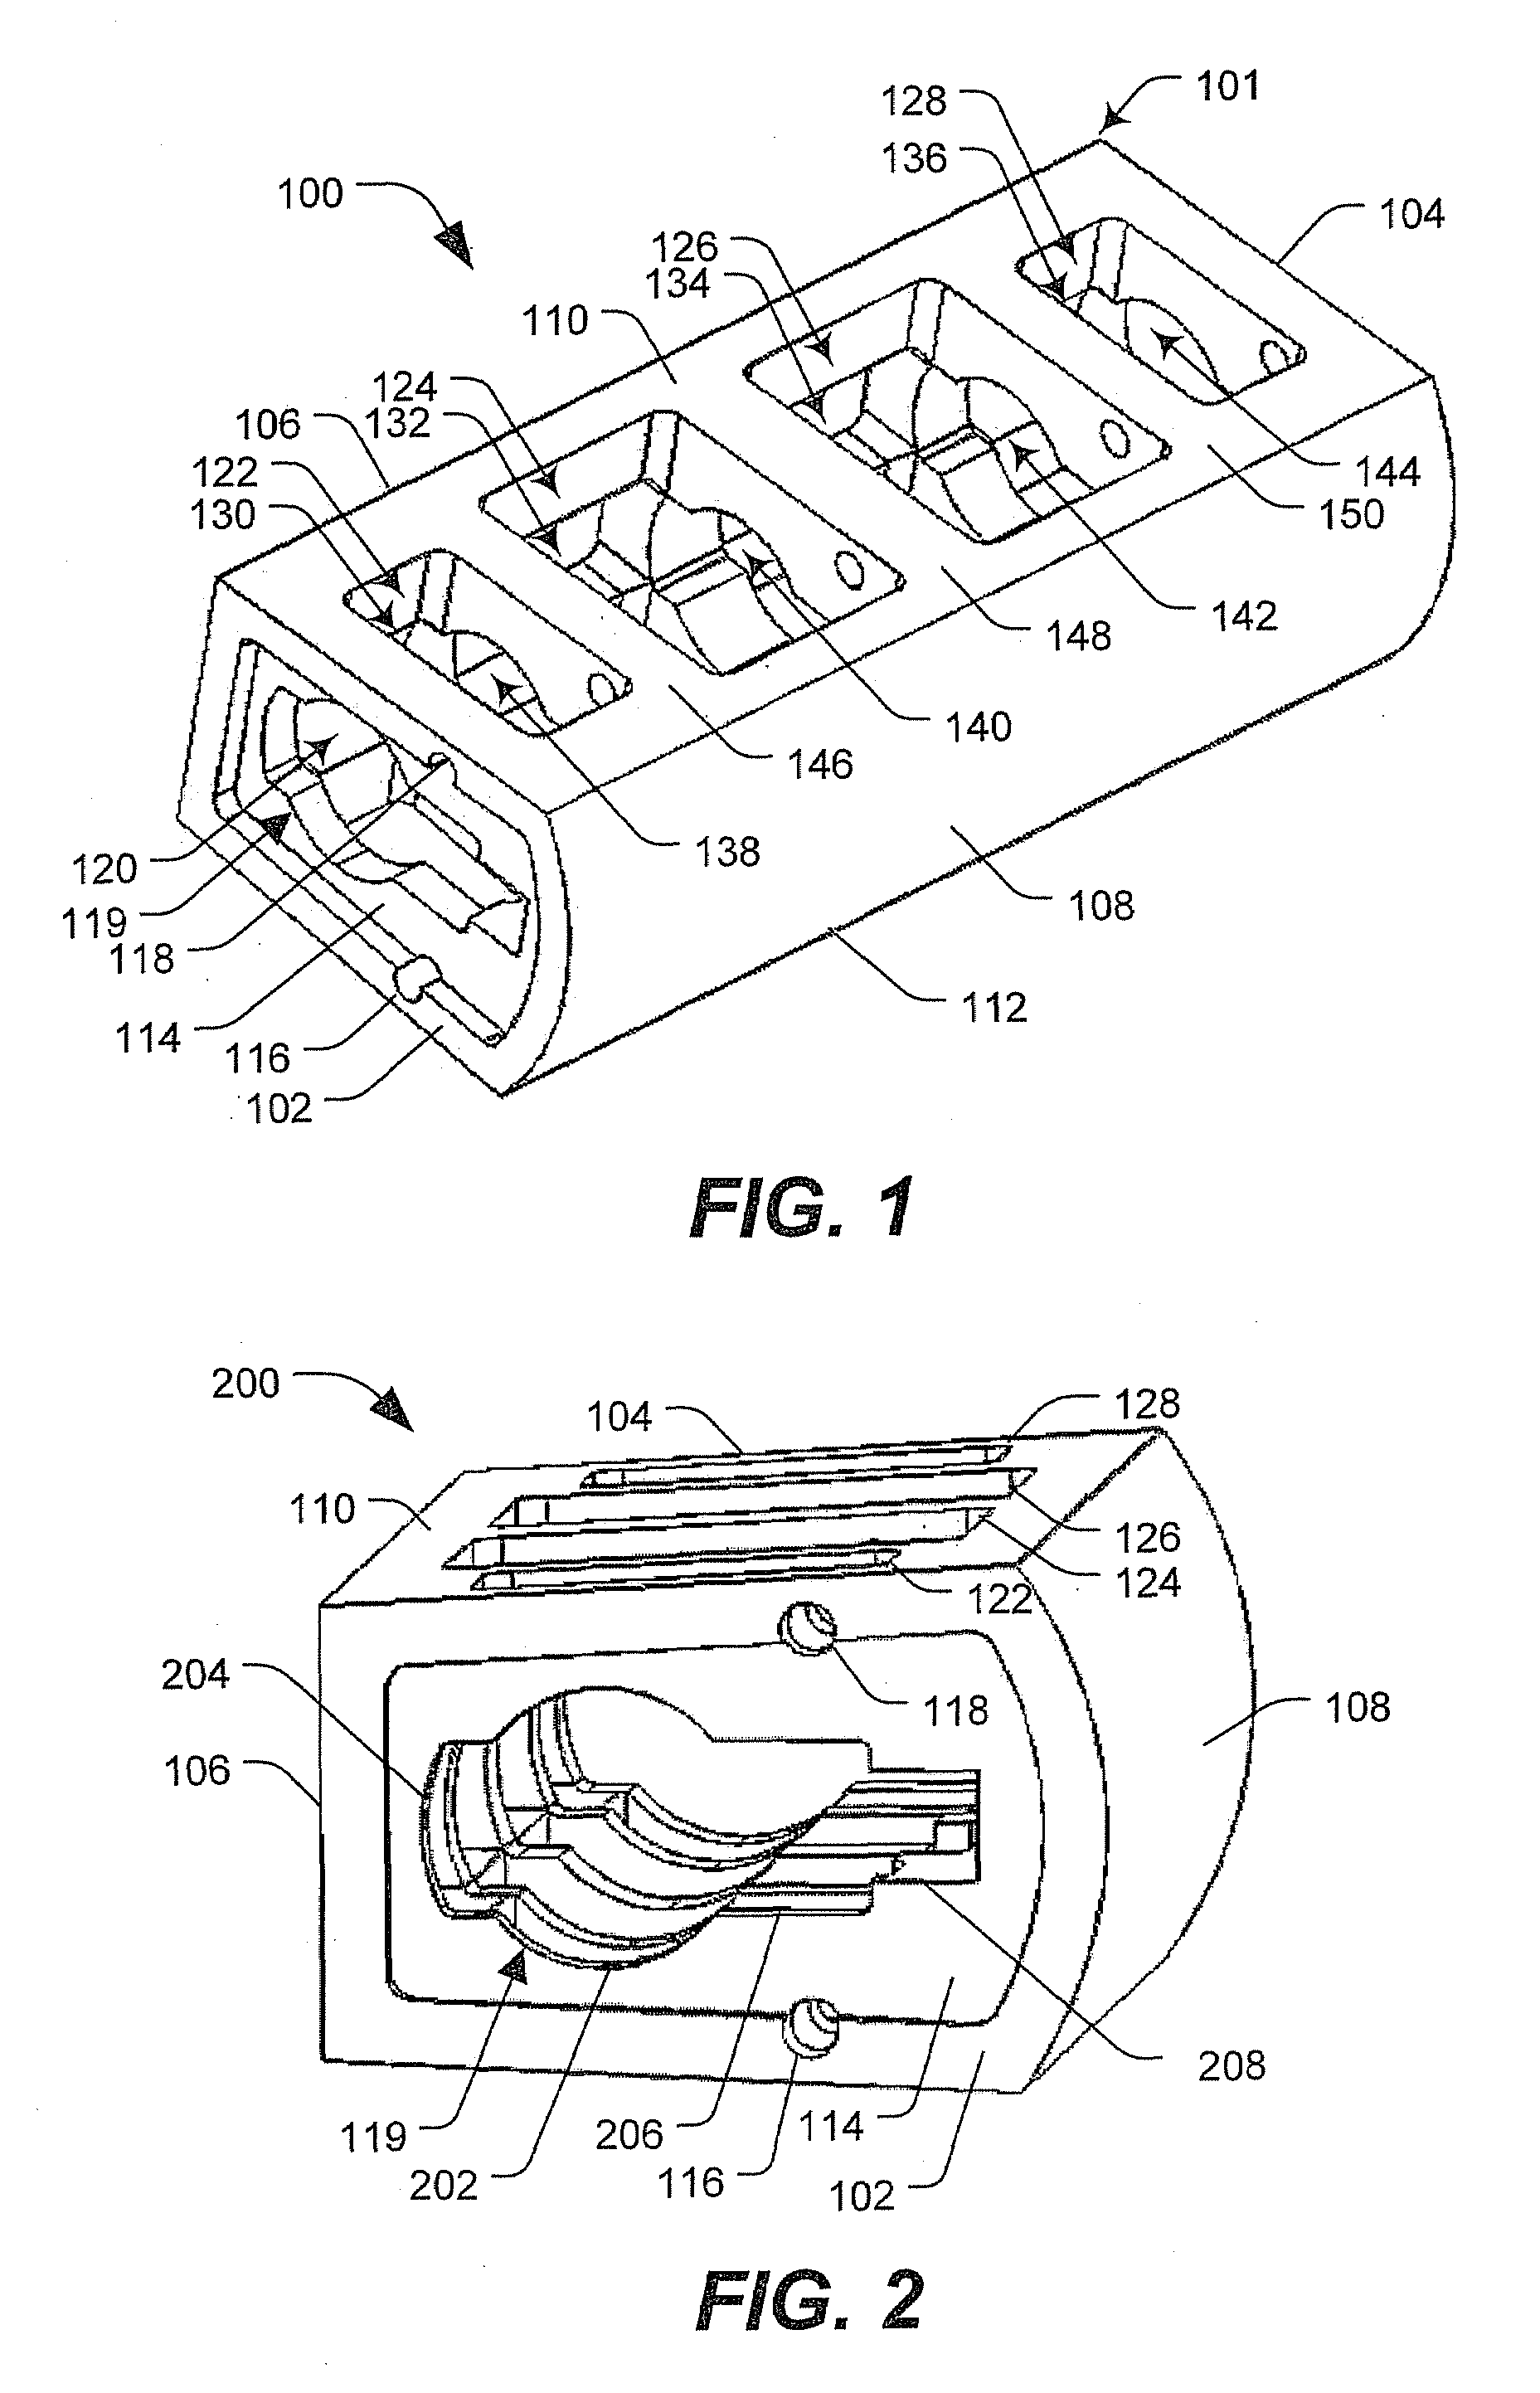 Minimally invasive lateral intervertbral fixation system, device and method